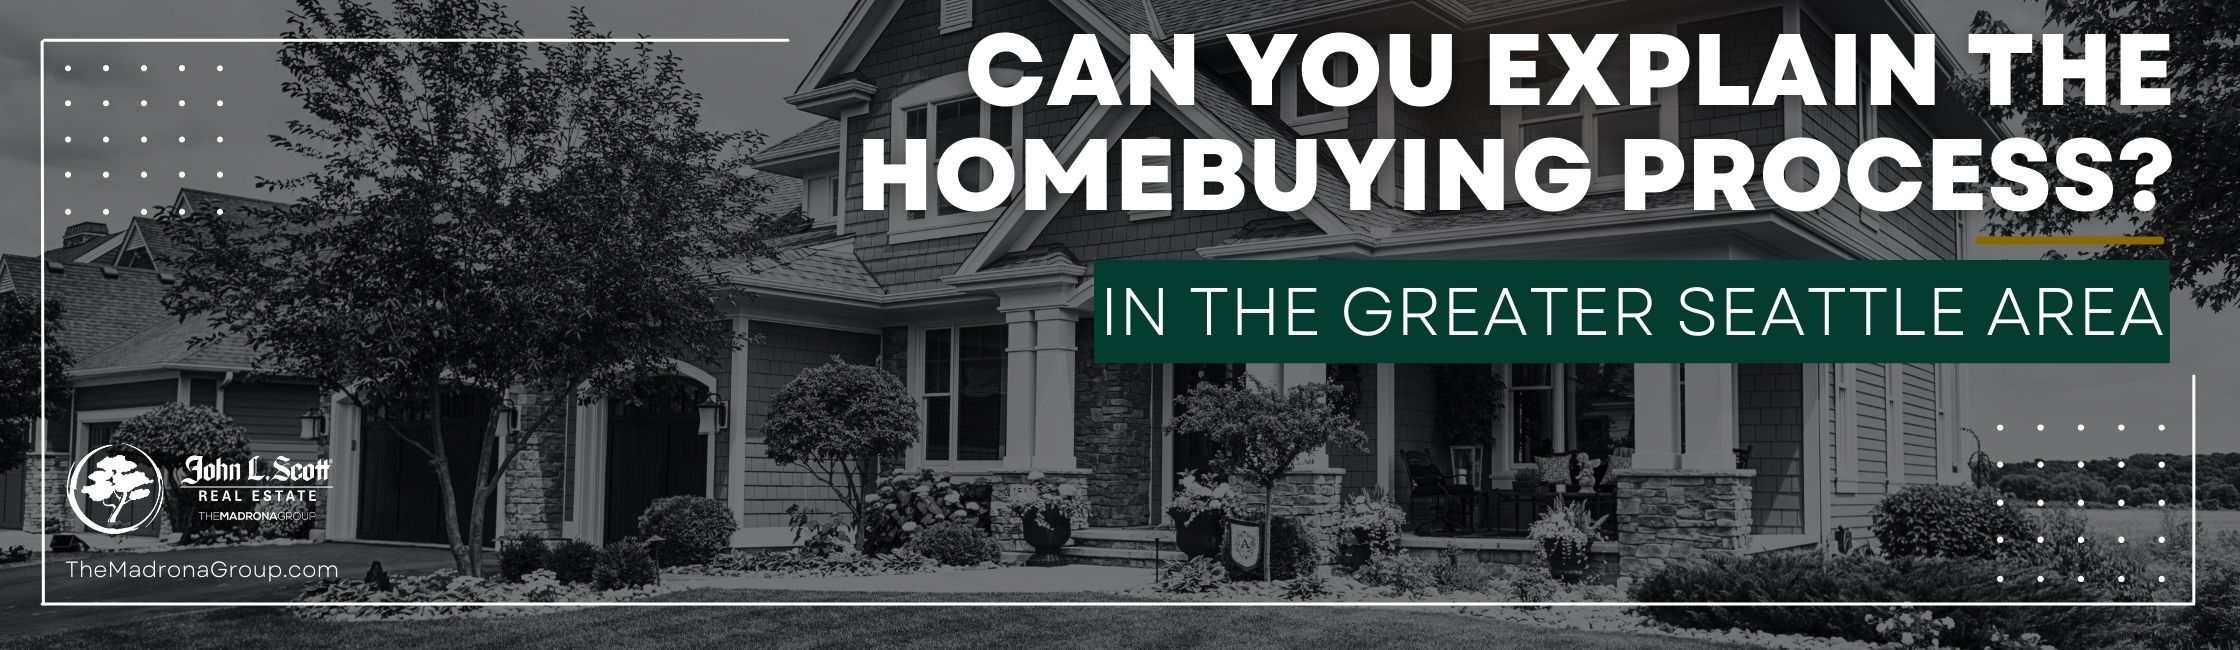 Can You Explain the Homebuying Process? In Seattle